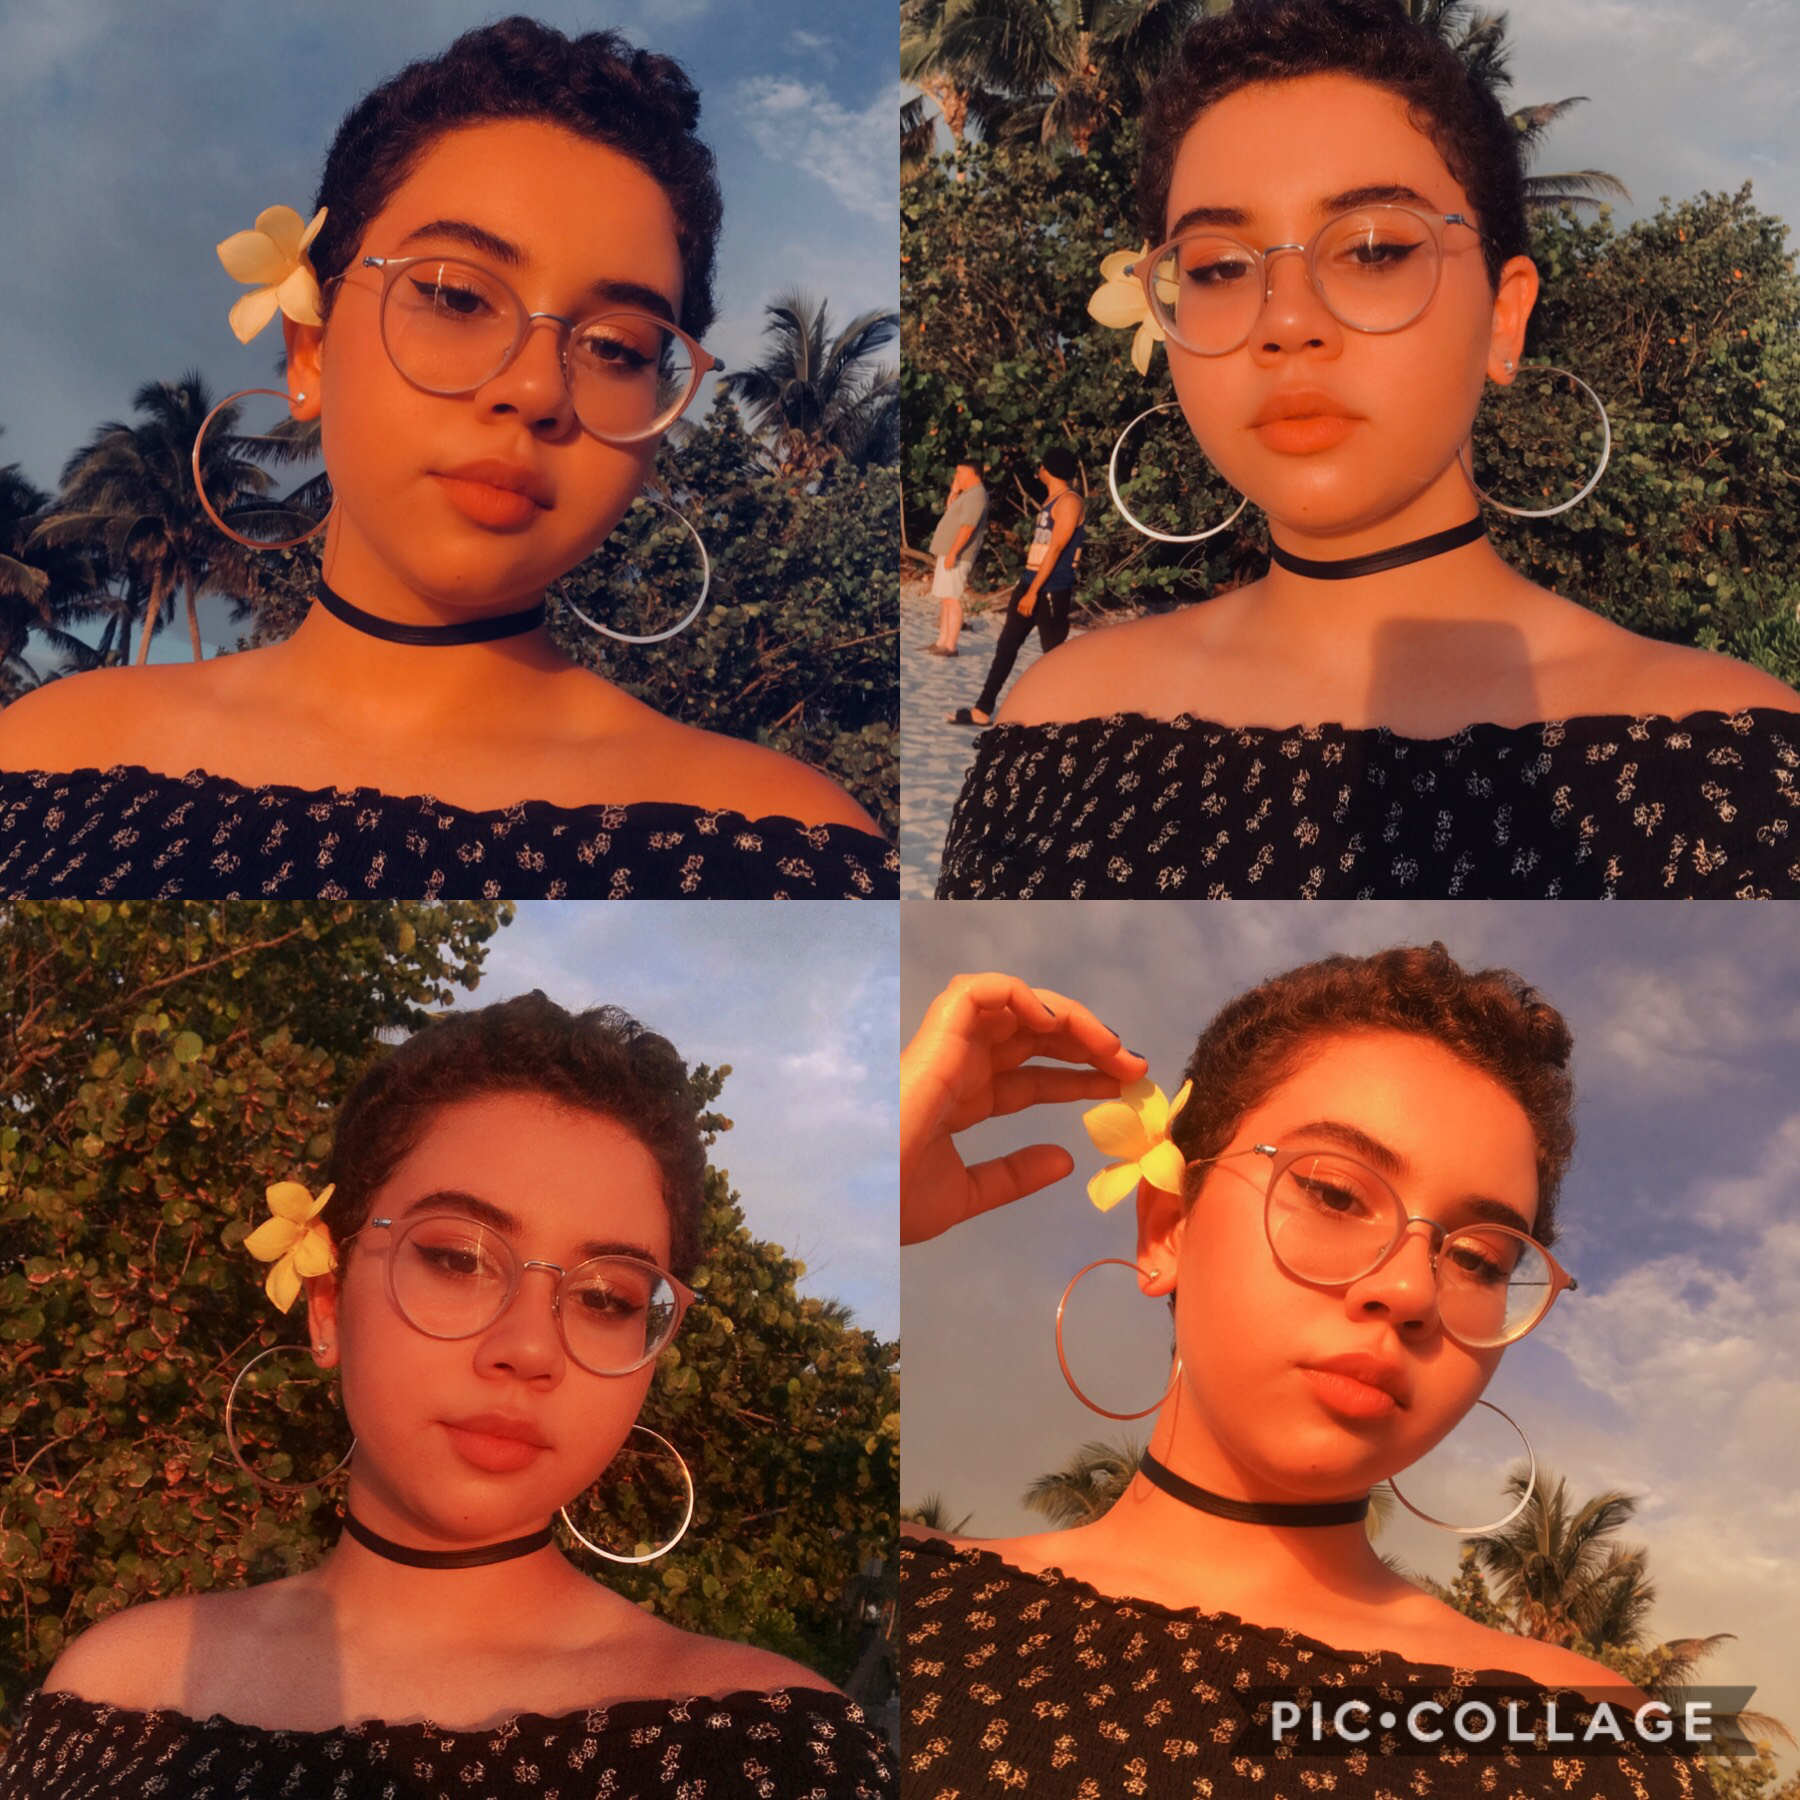 🌊🌞🌼Some sunset selfies by the beach in naples, florida🌼🌞🌊